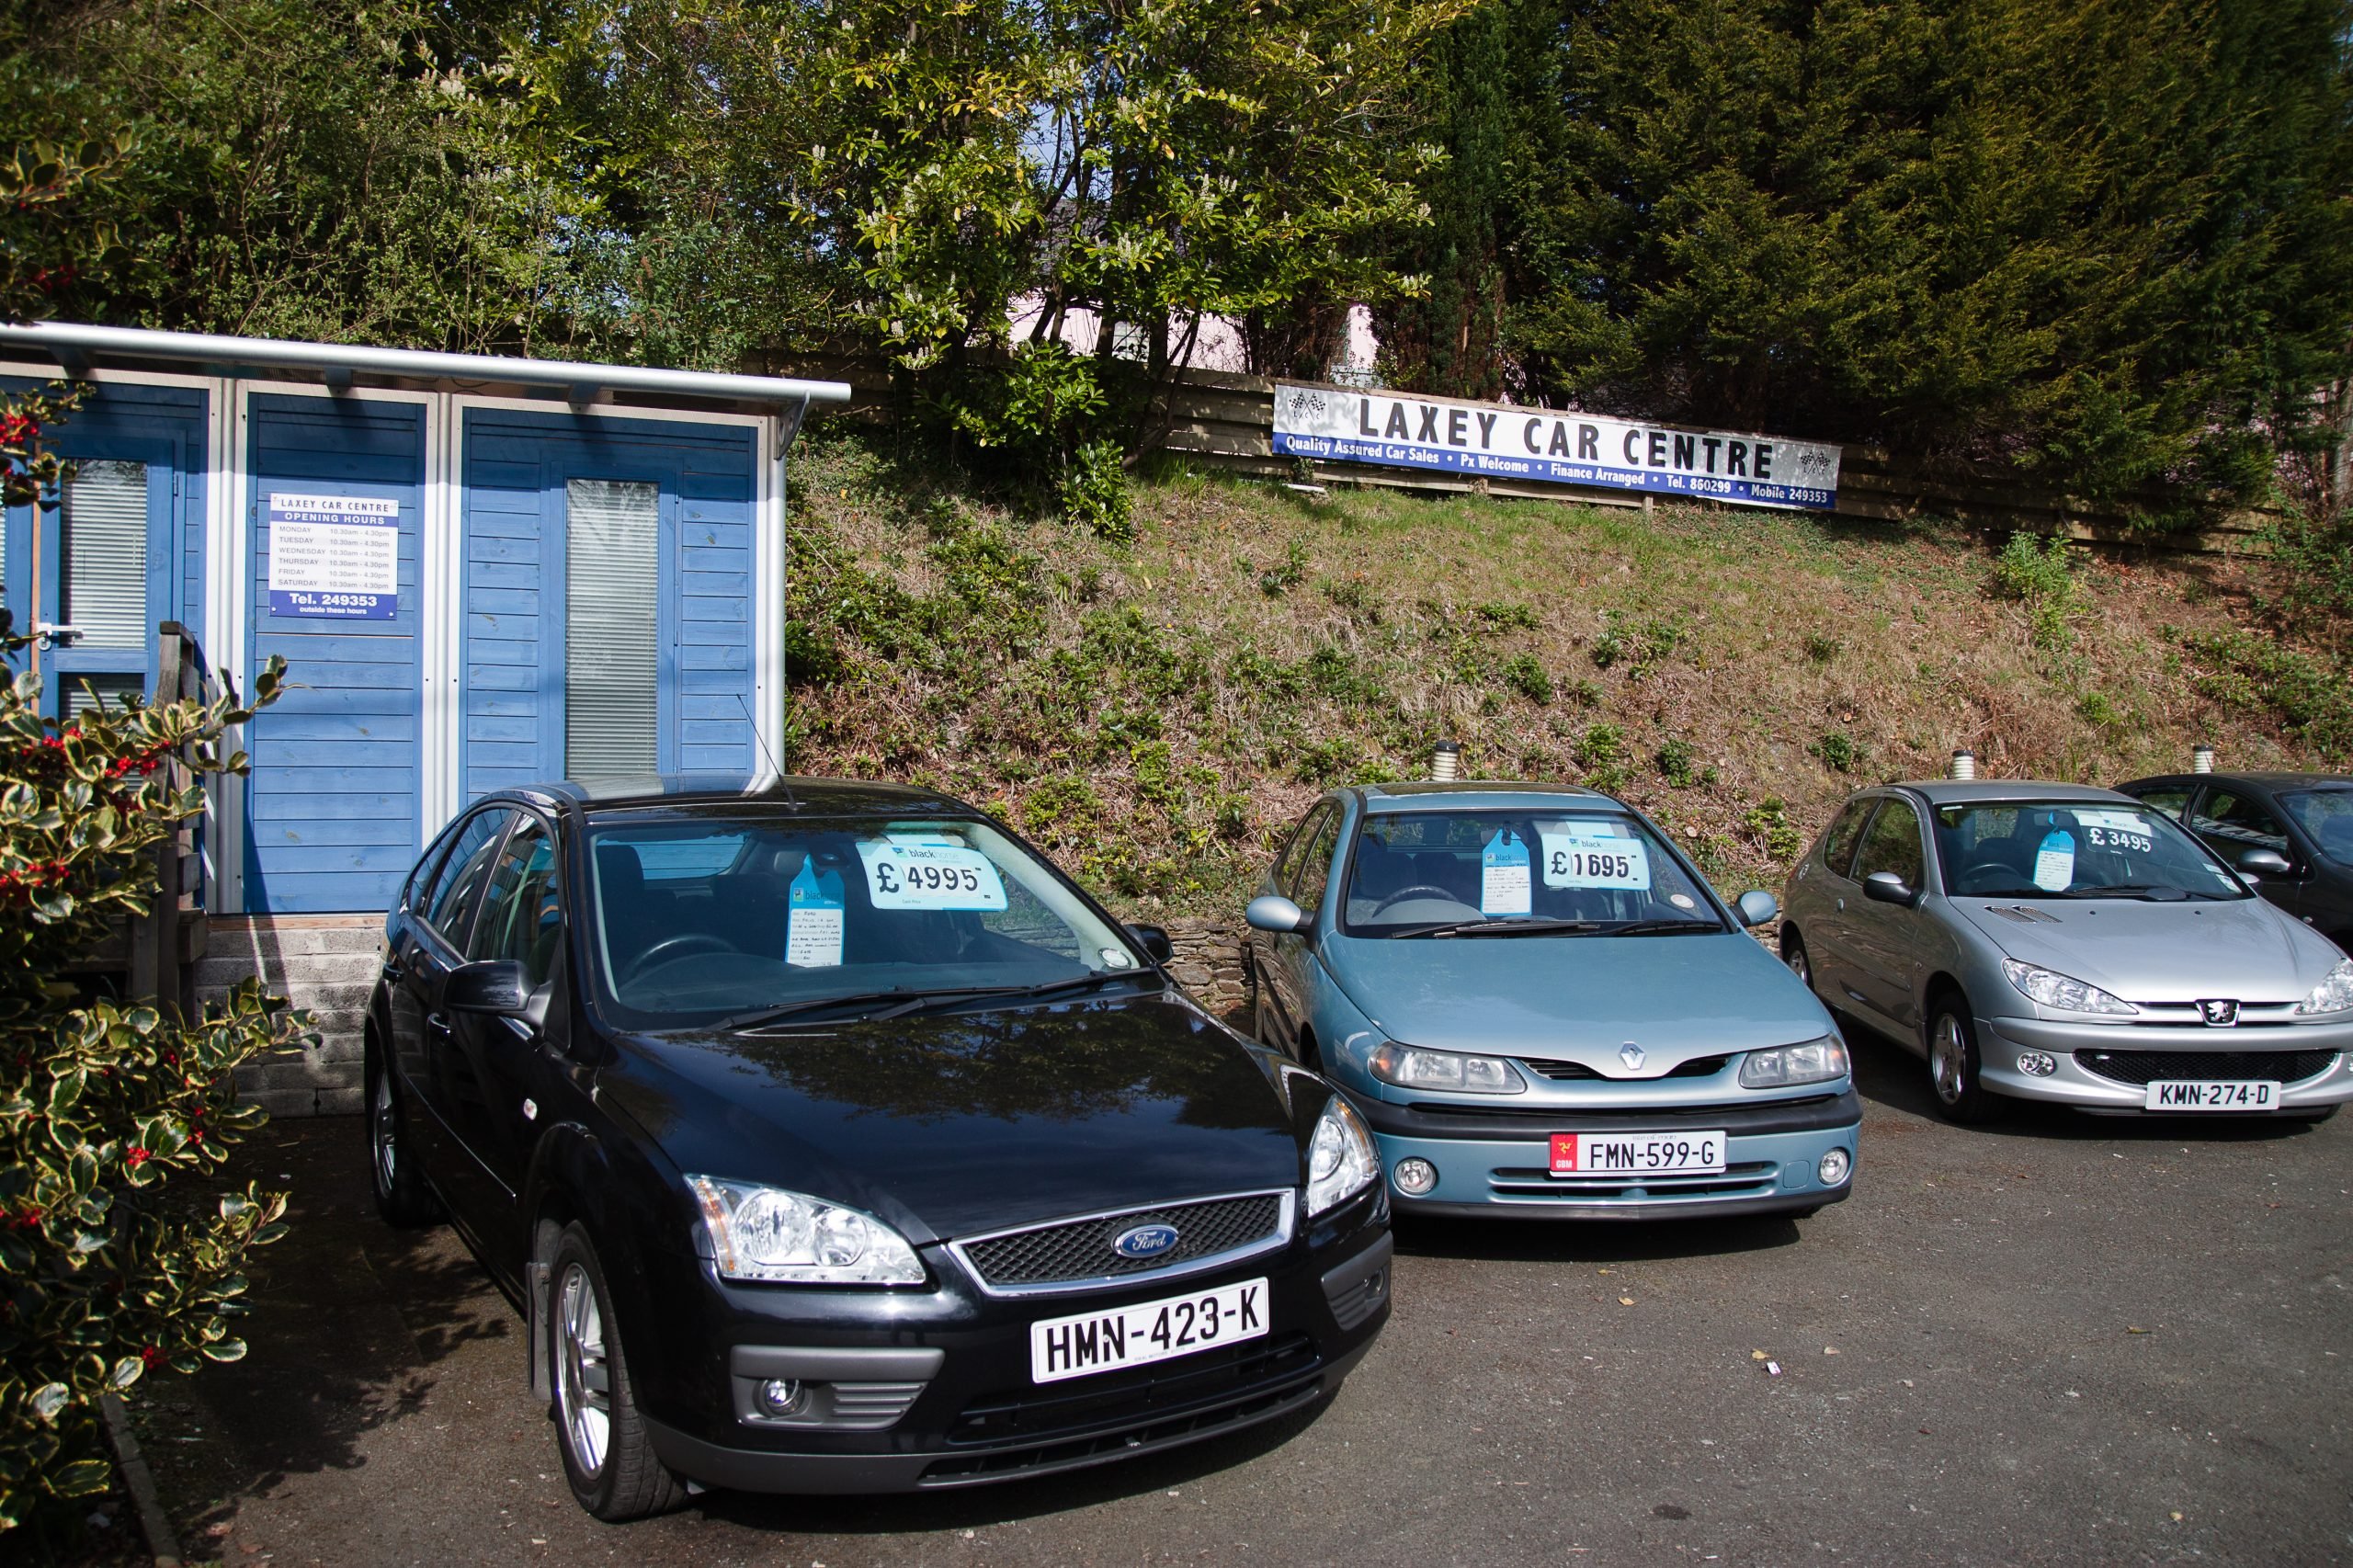 Laxey Car Centre New Road, Laxey IM4 7BD